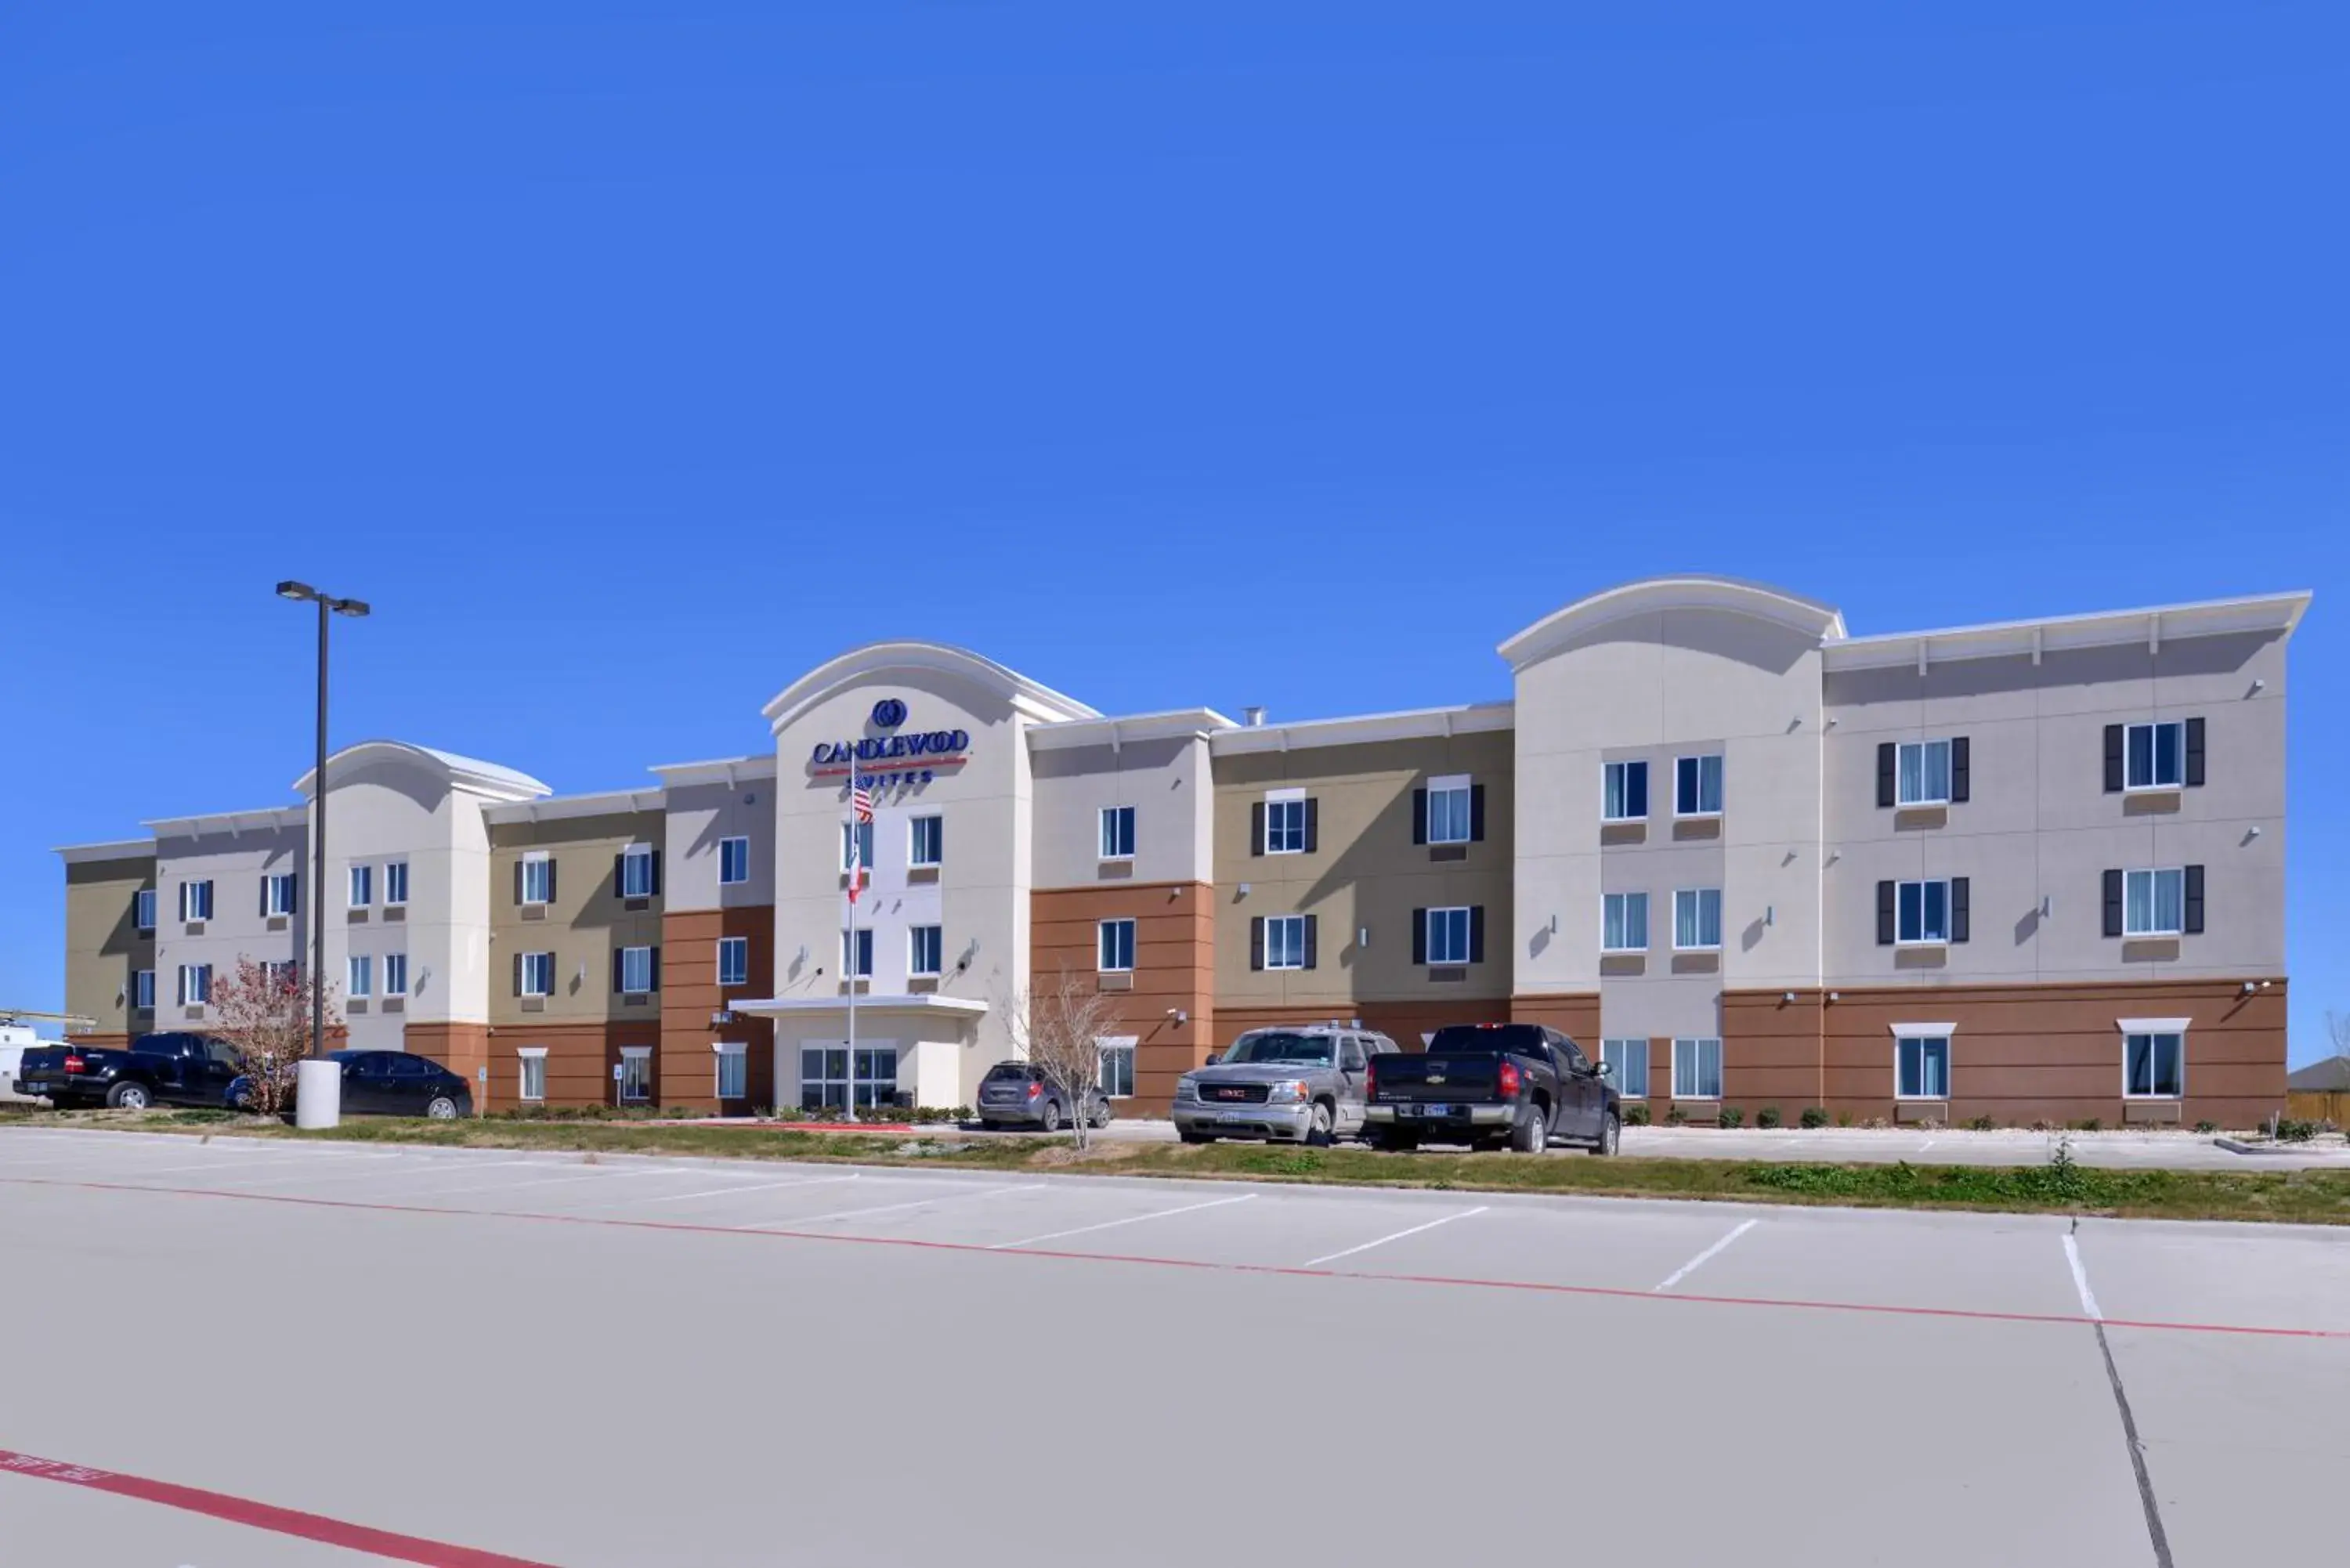 Property Building in Candlewood Suites Kenedy, an IHG Hotel